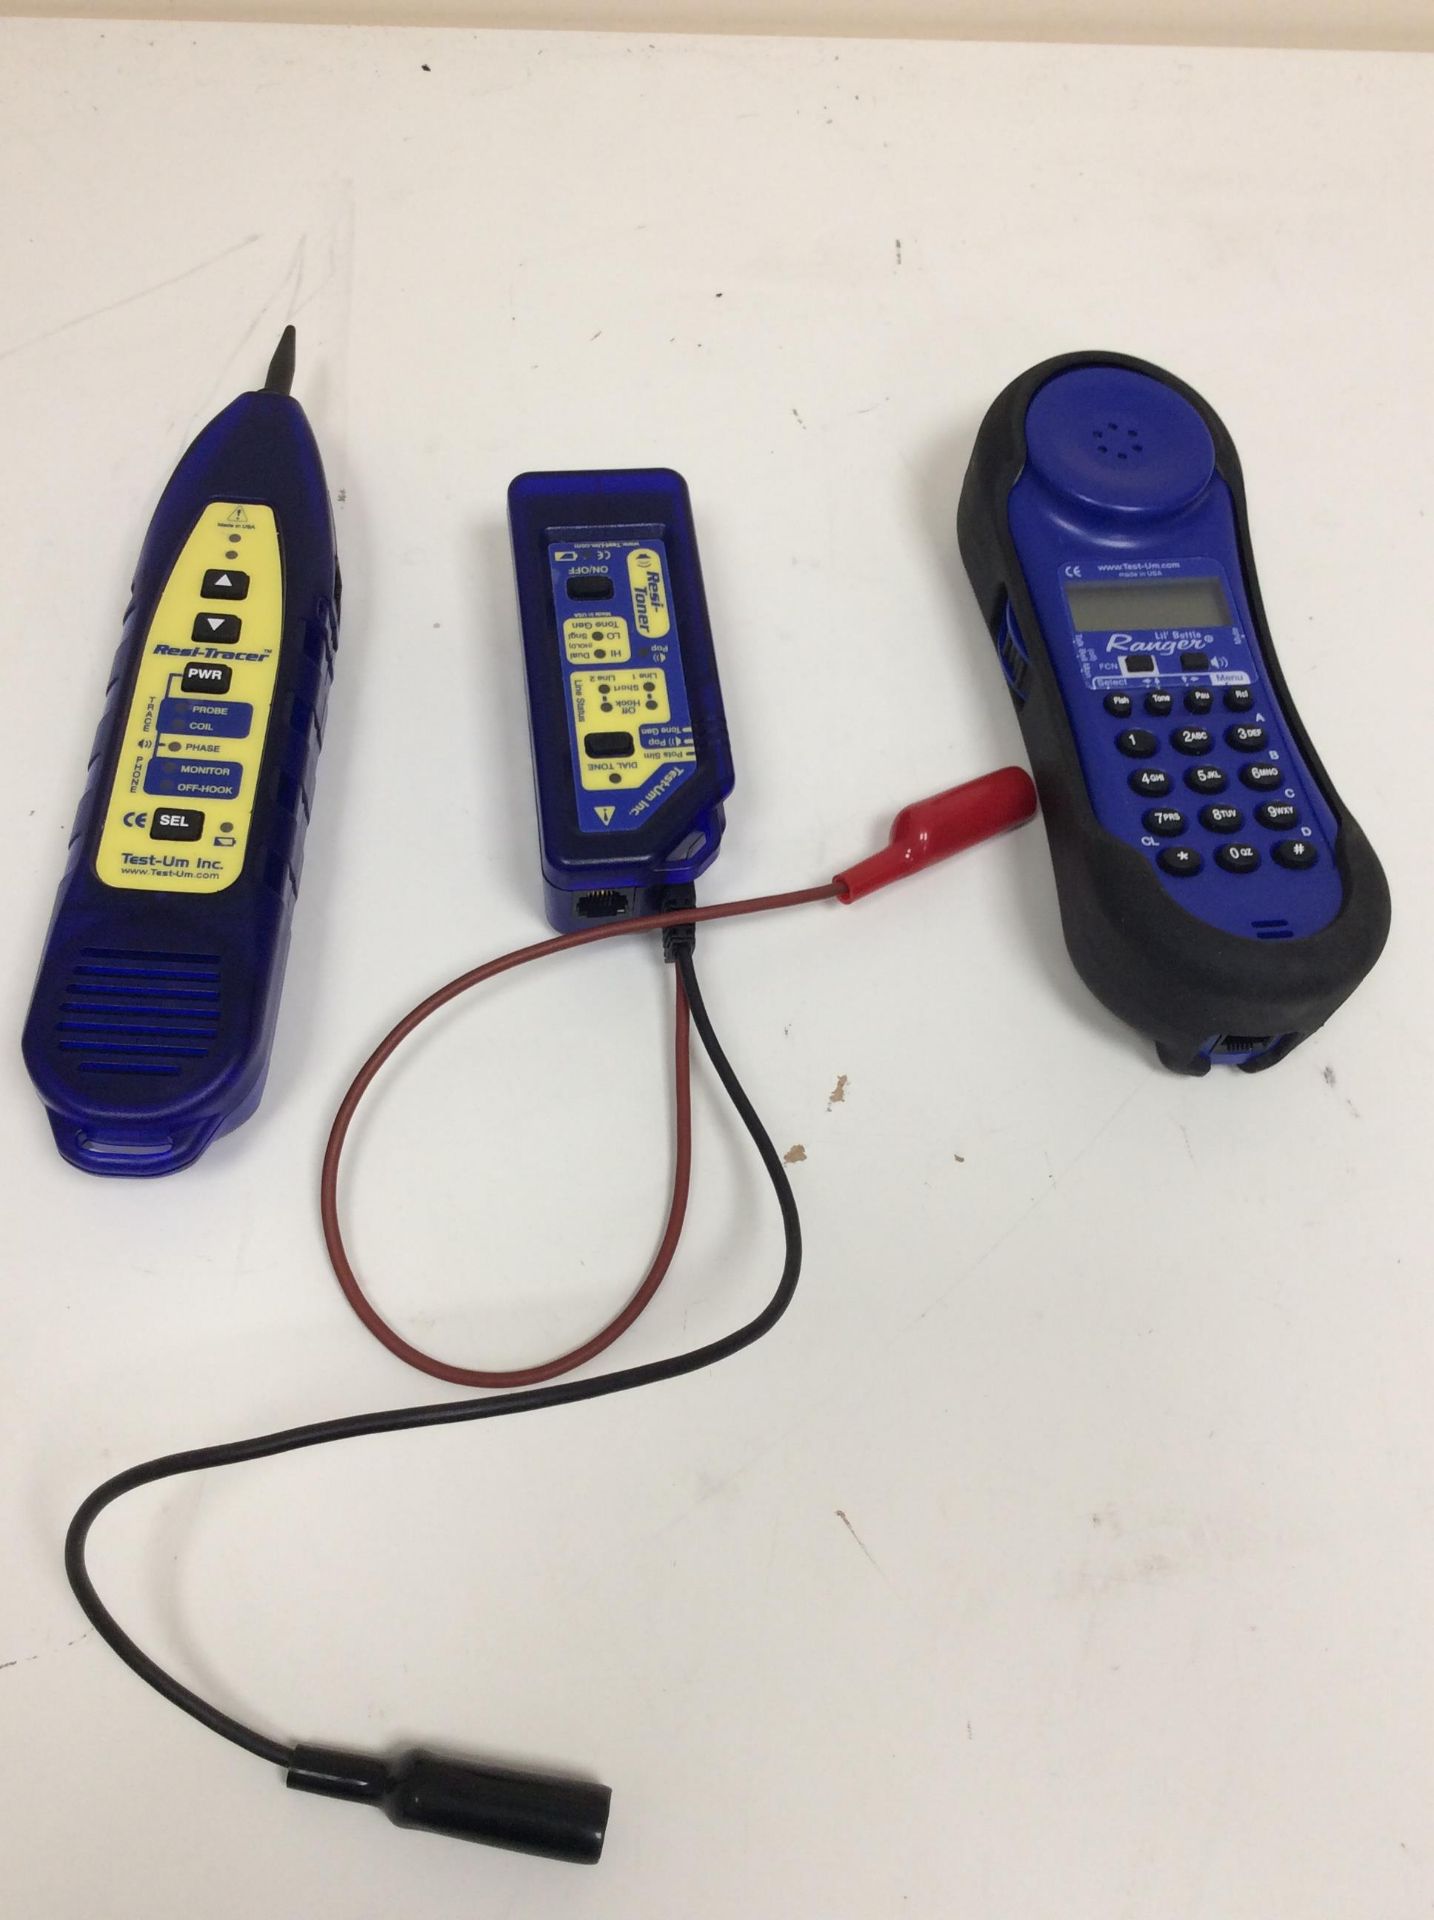 Test-um lil buttie ranger telephone test unit with resi-toner and resi-tracer - Image 4 of 4